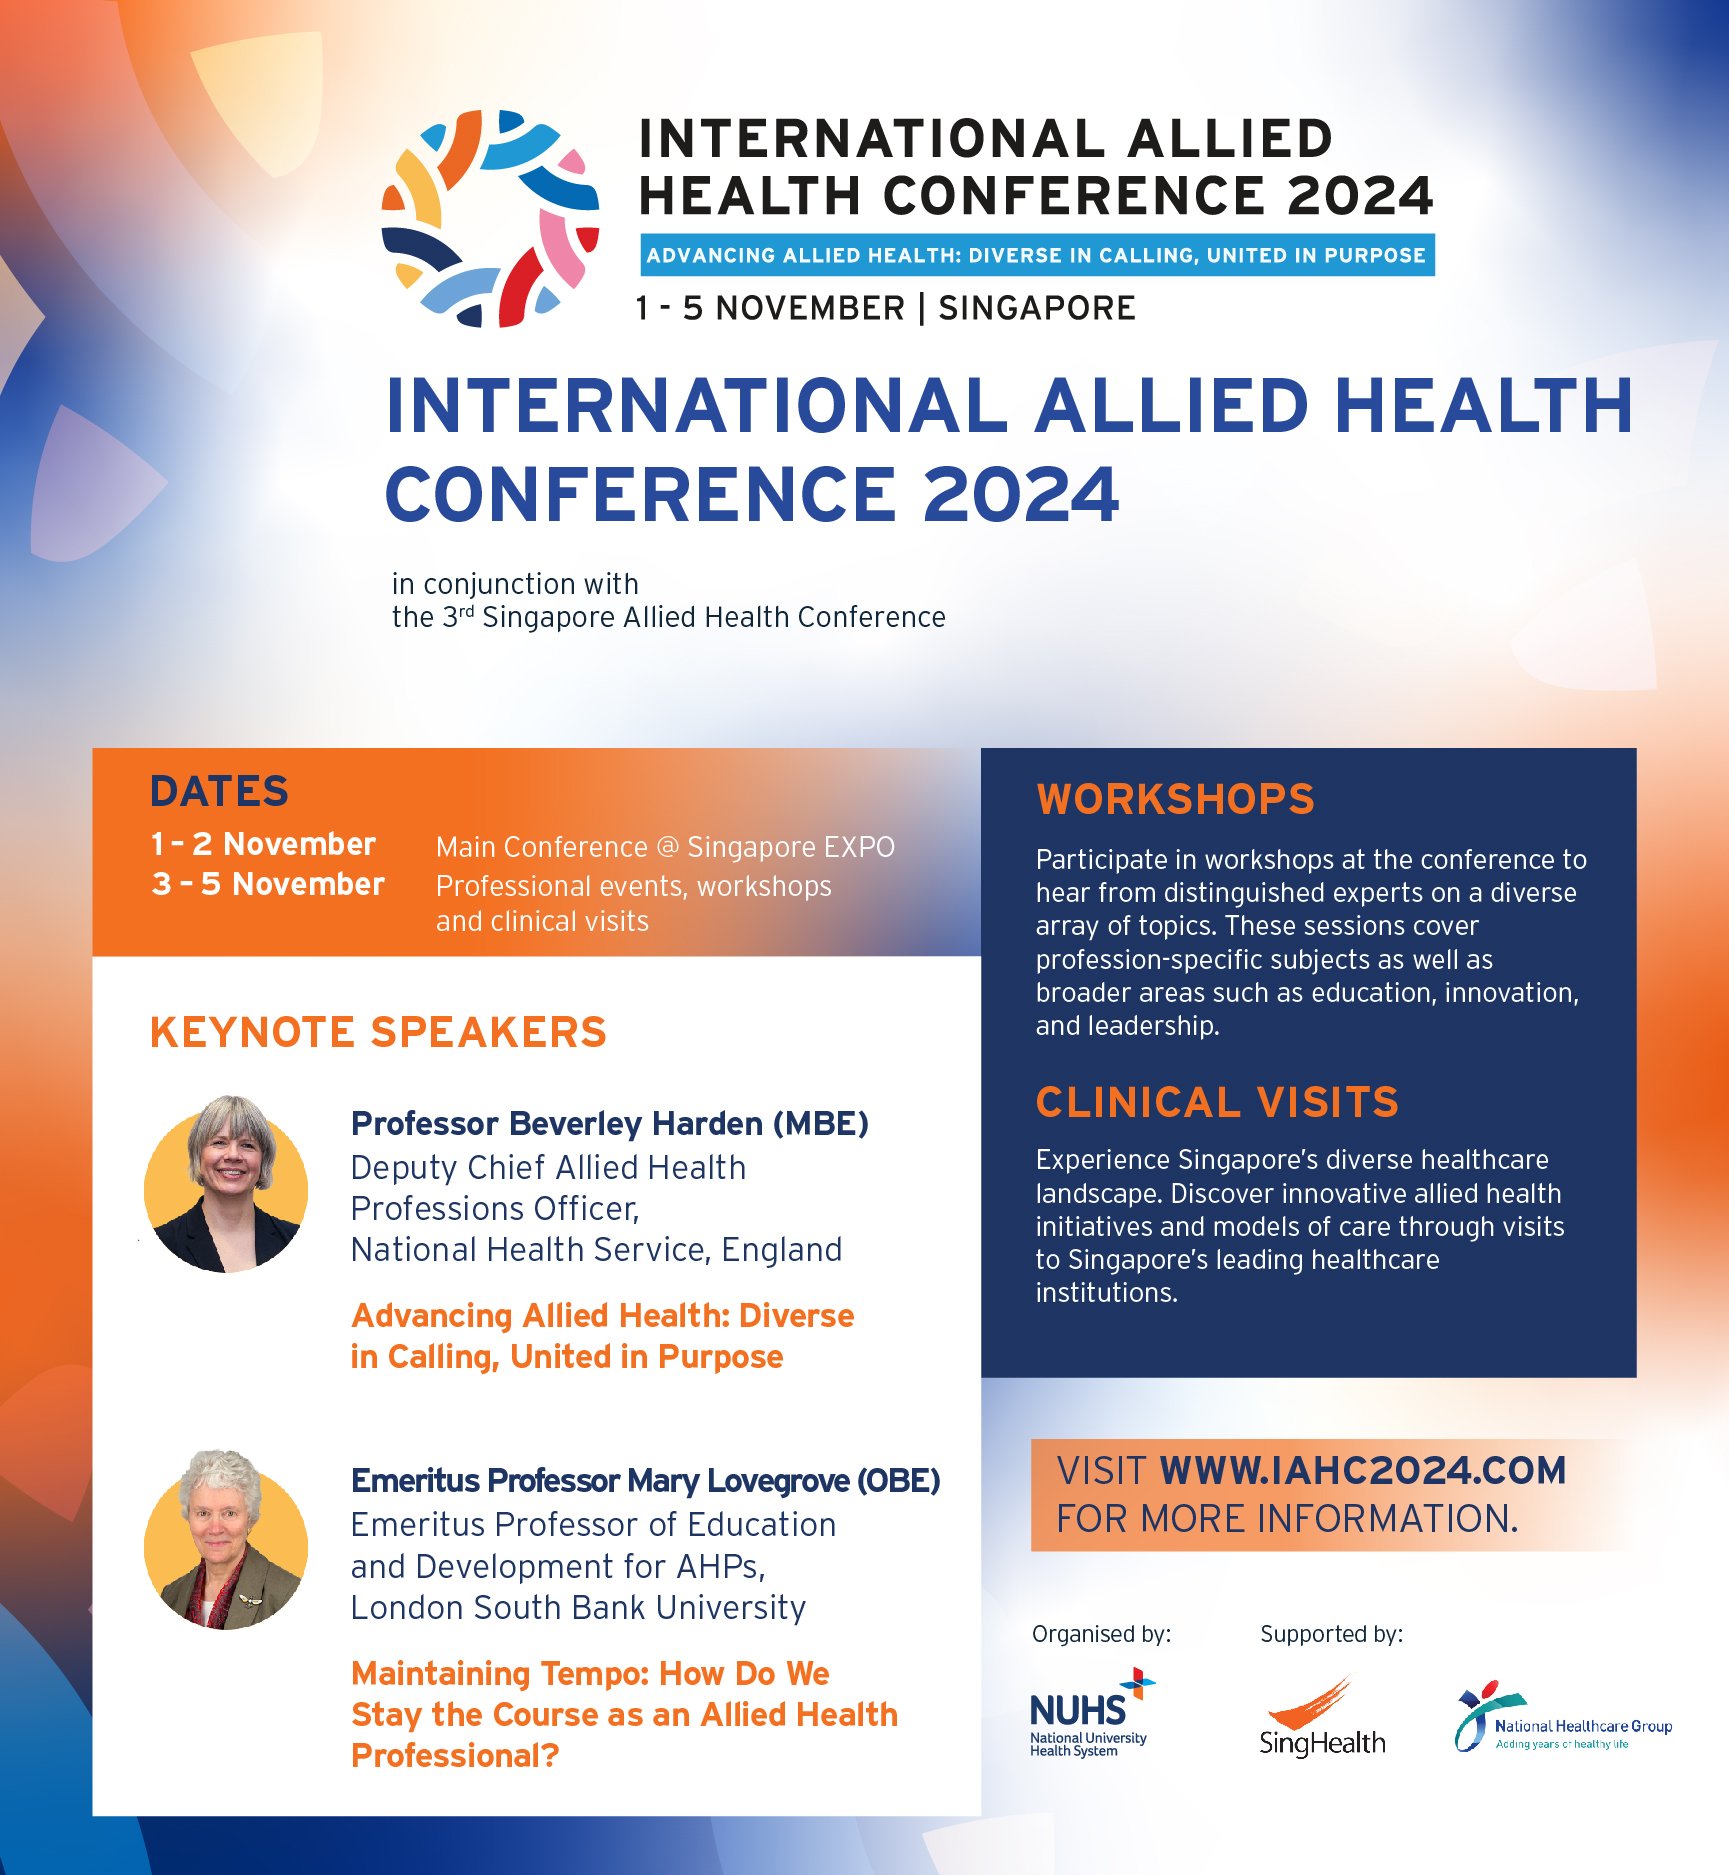 International Allied Health Conference 2024